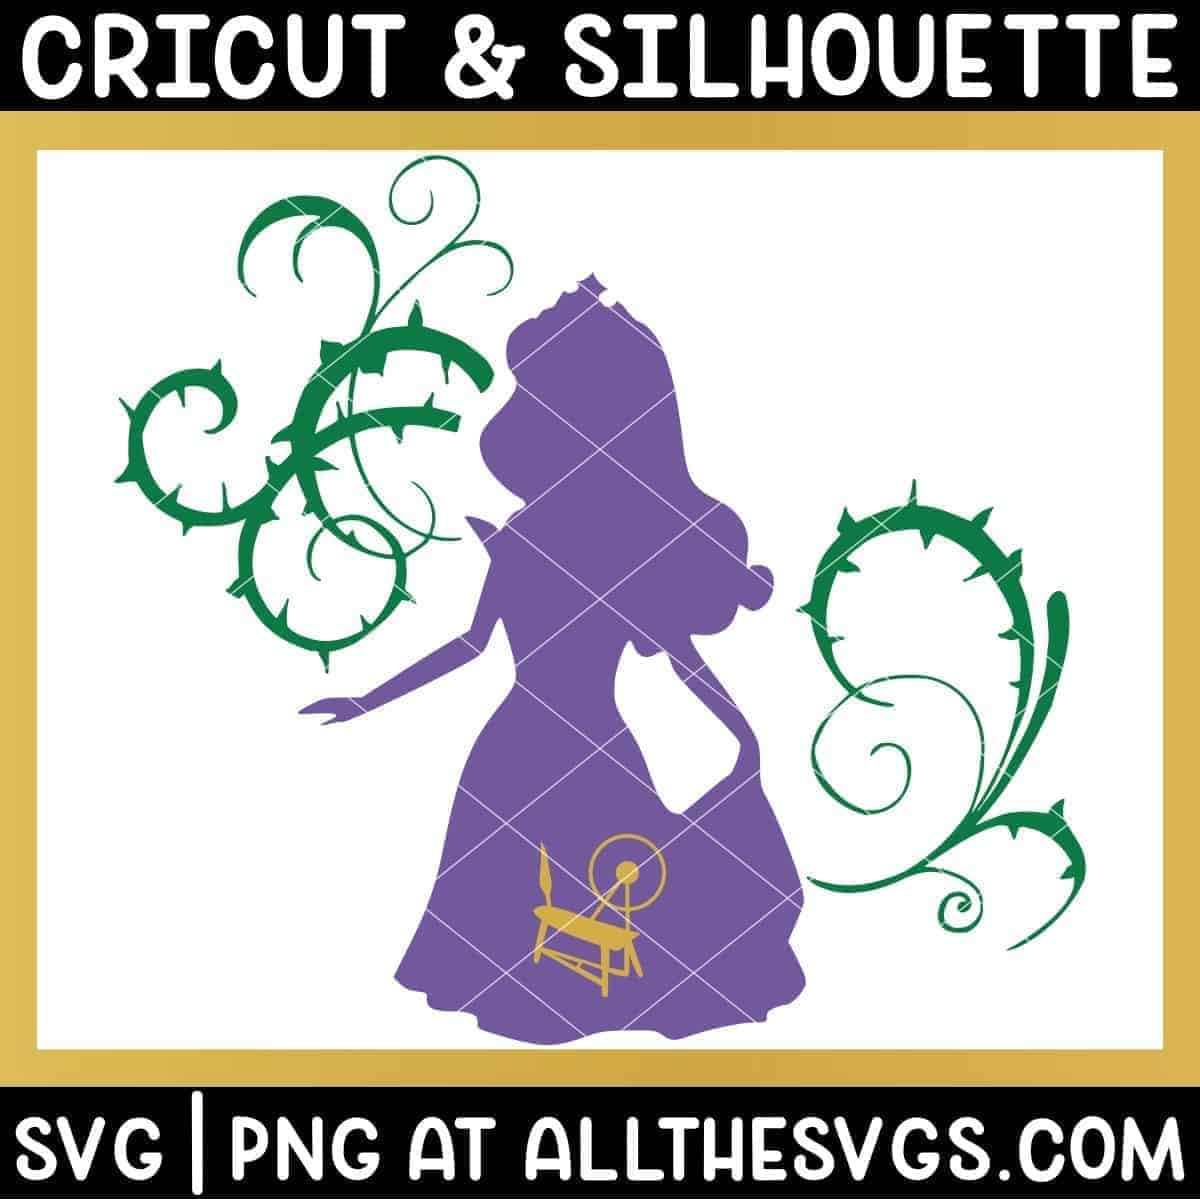 free sleeping beauty svg file chibi anime style aurora disney princess silhouette with vine and spindle embellishment.